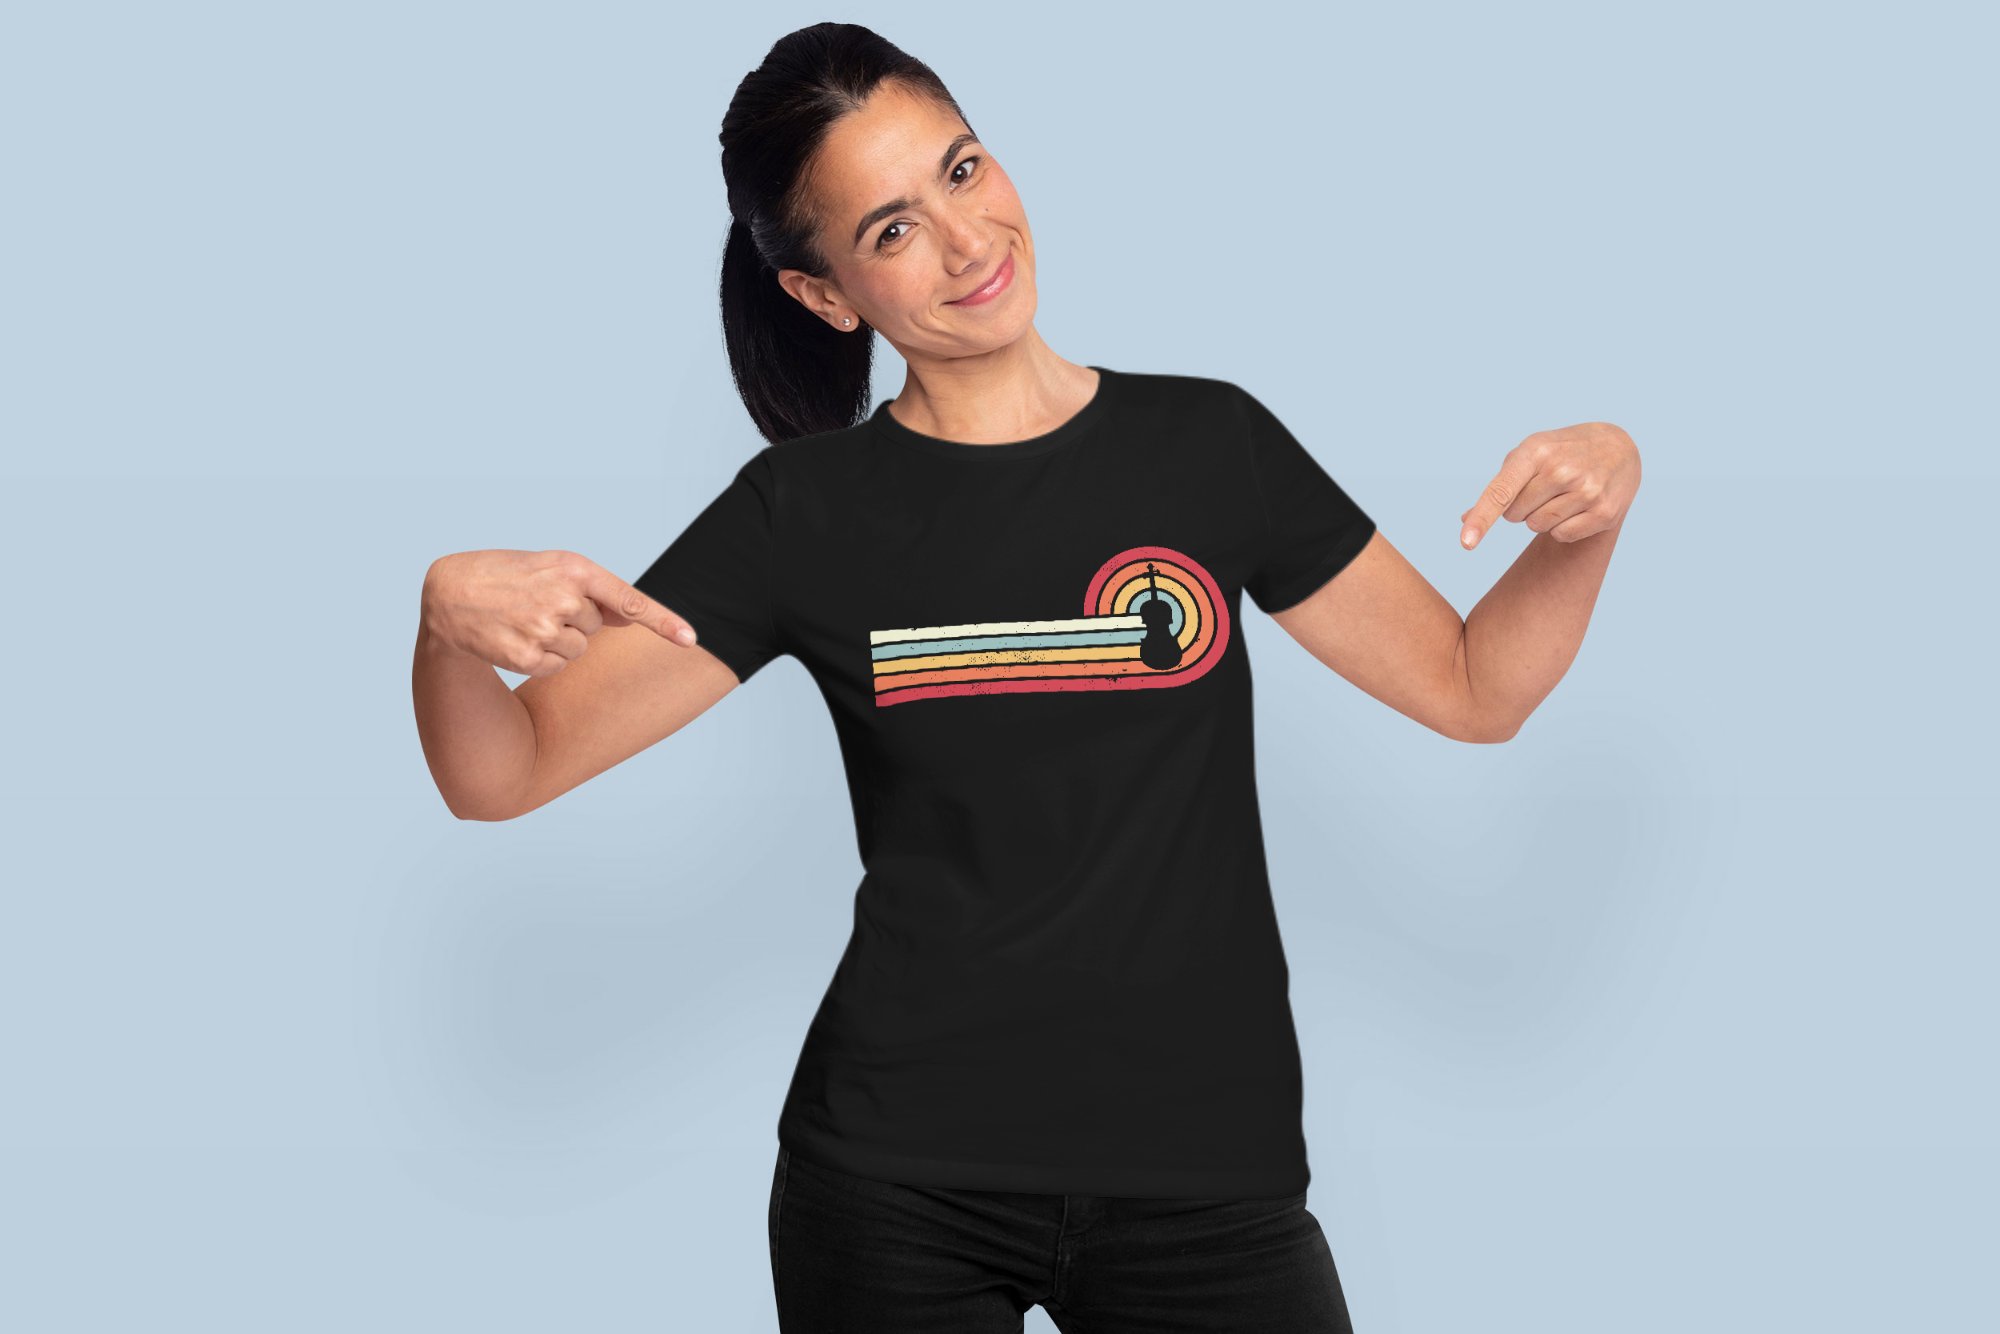 woman in ponytail and t shirt mockup 2000x1334 843